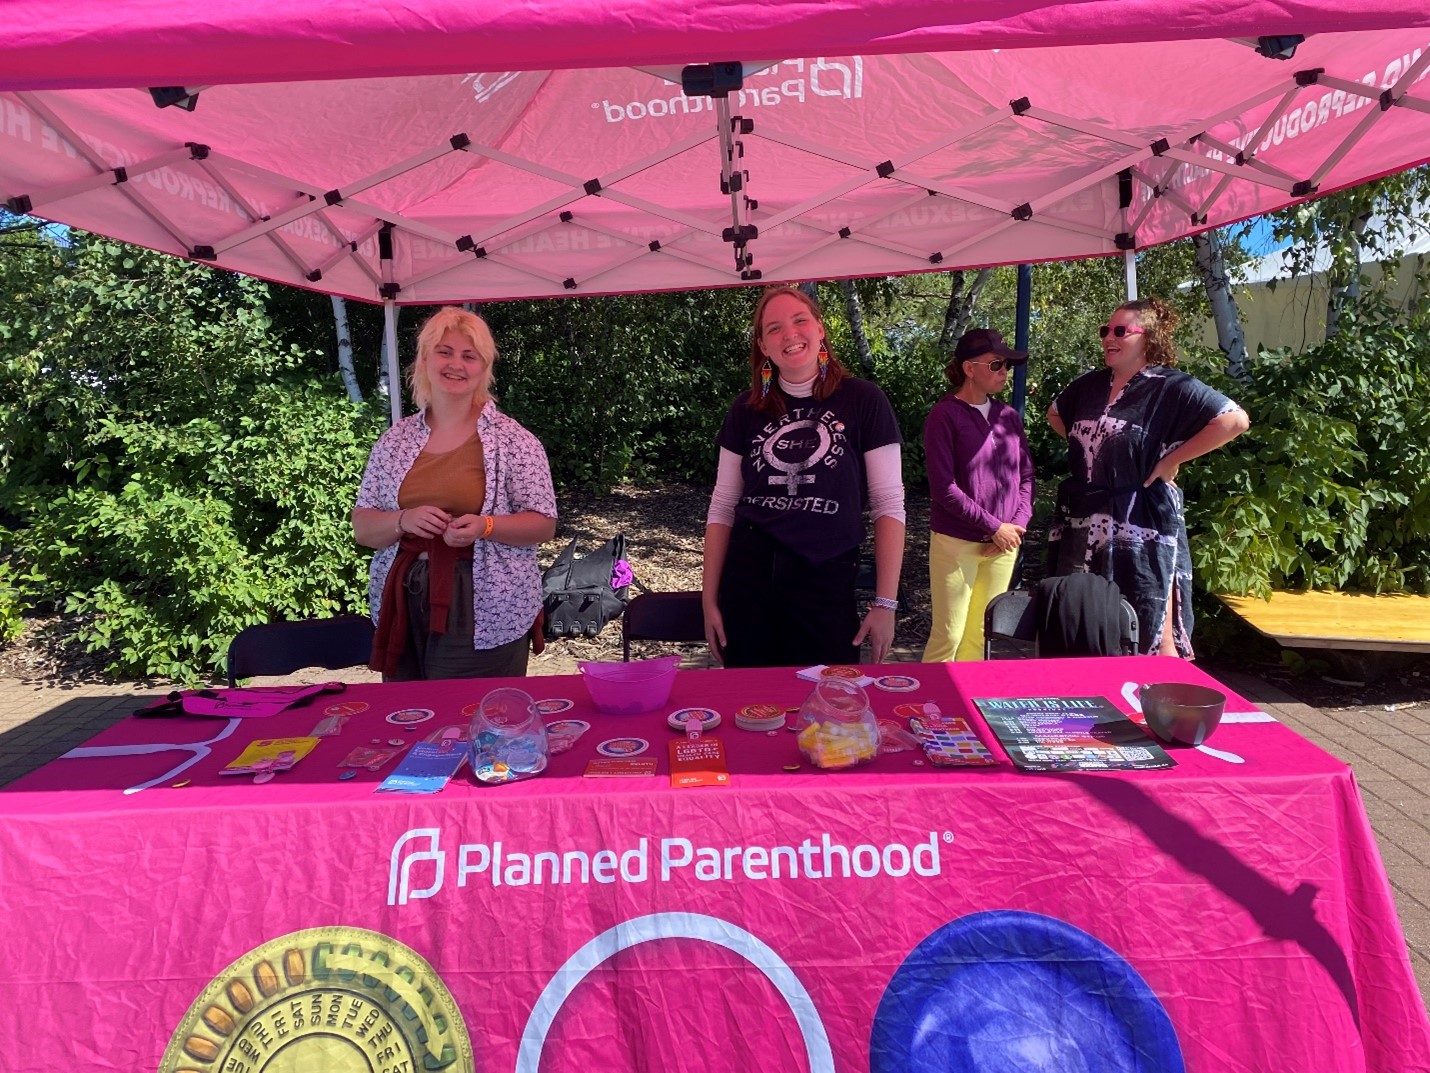 Two people are standing behind a Planned Parenthood booth covered with a pink tablecloth displaying various informational and promotional materials. The booth is under a pink canopy with the Planned Parenthood logo, set against a backdrop of greenery and a few other people.